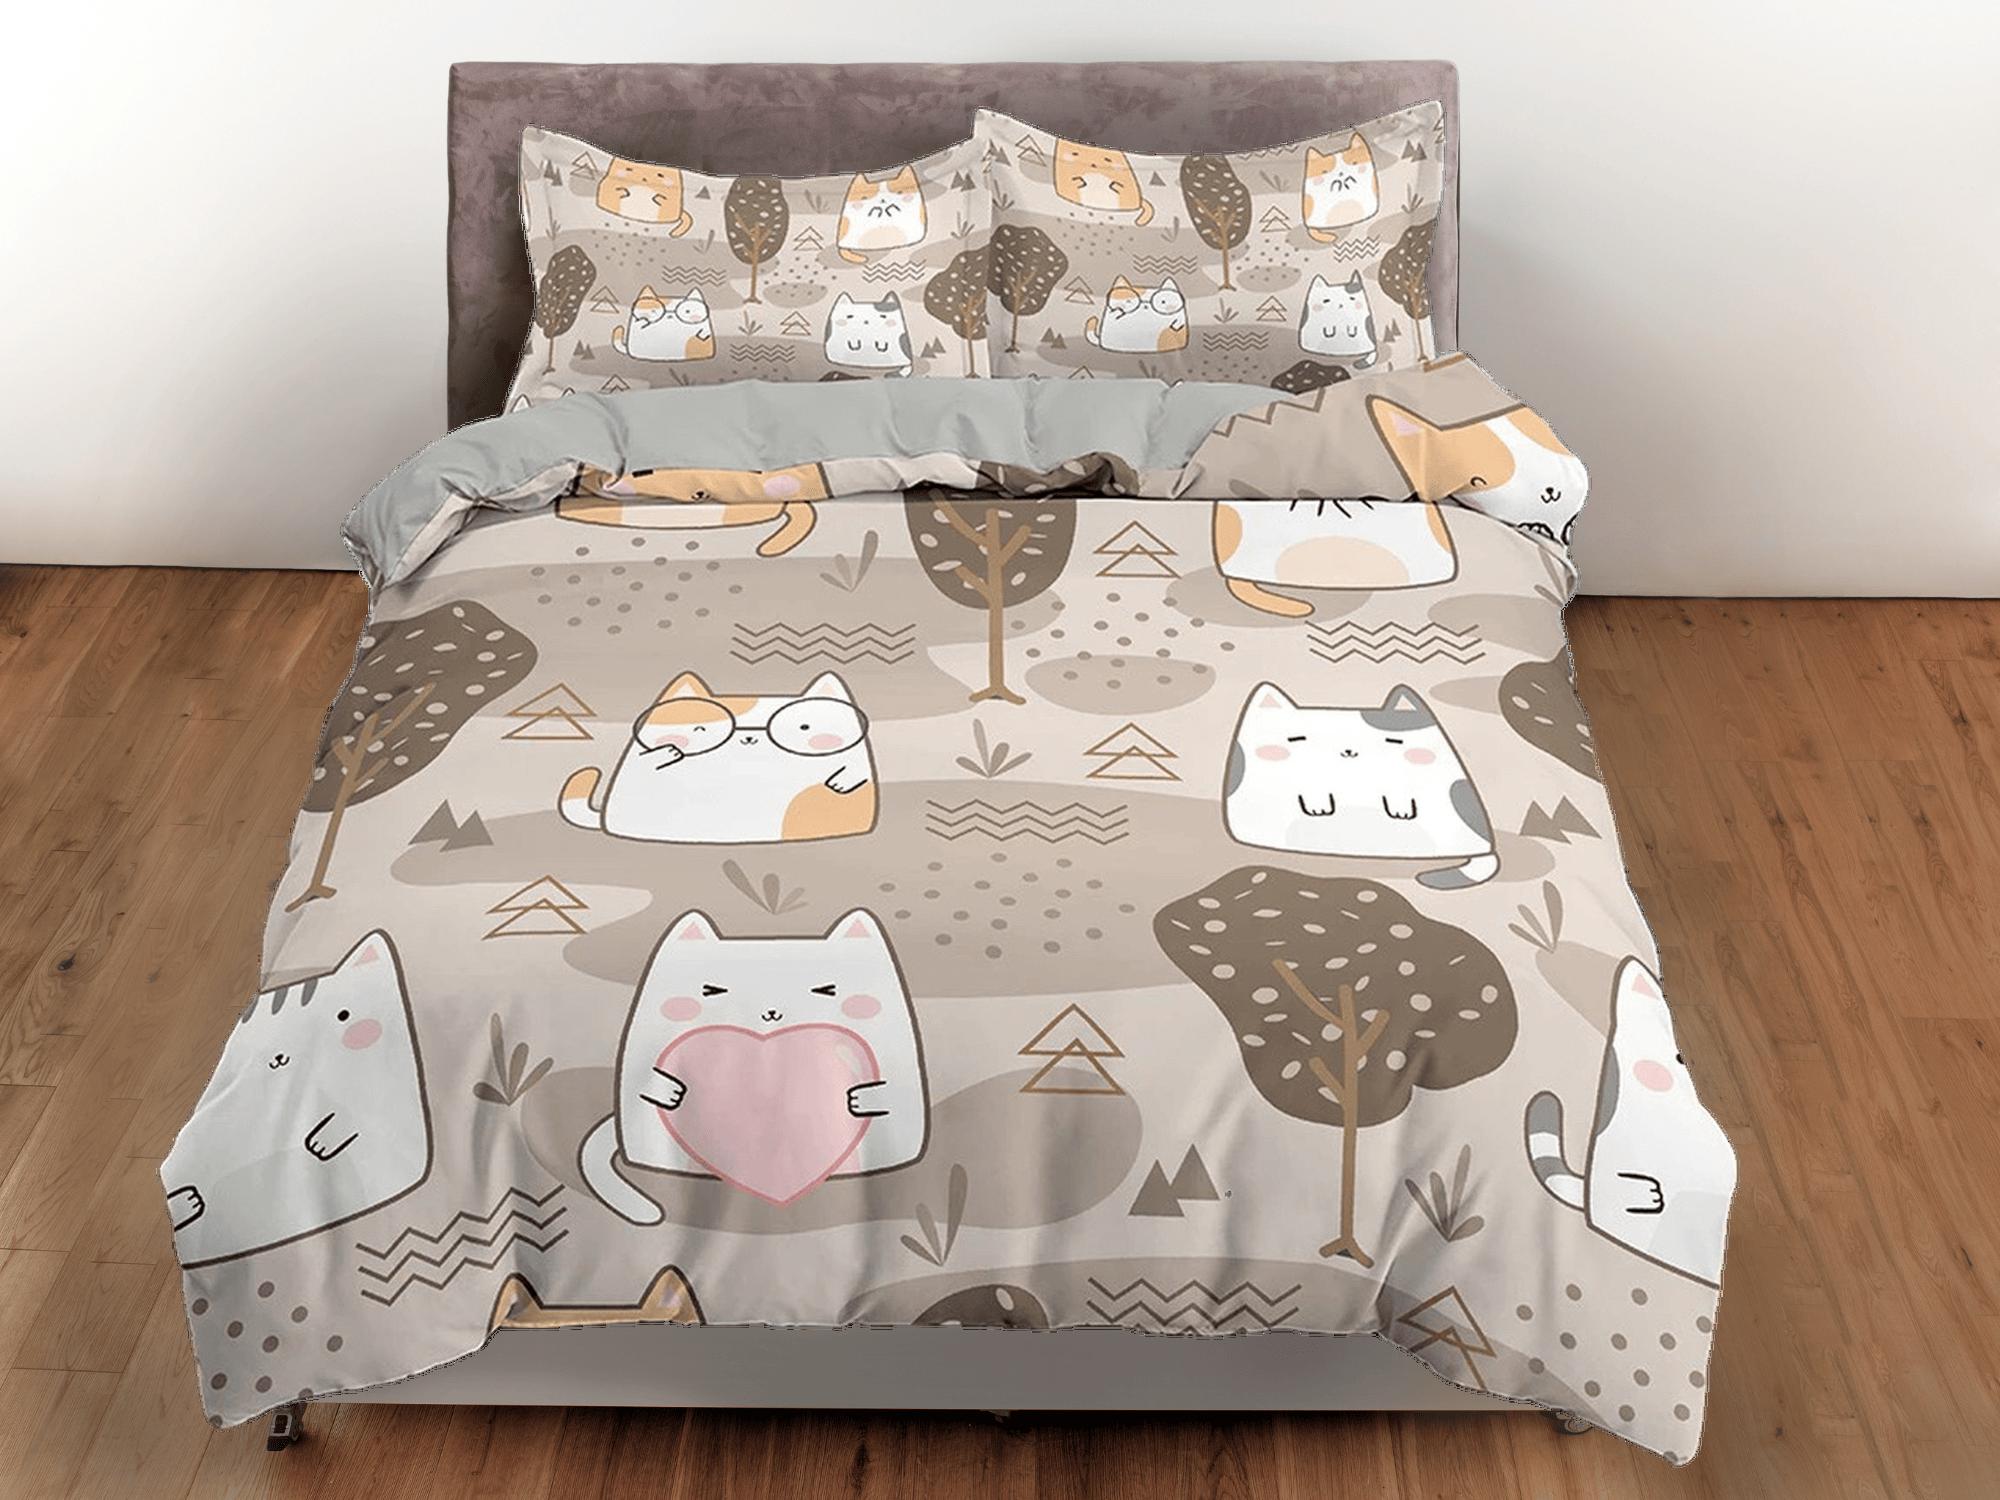 daintyduvet Cute fatty cats in brown bedding, unique duvet cover for nursery kids, crib bedding, baby zipper bedding, king queen full twin